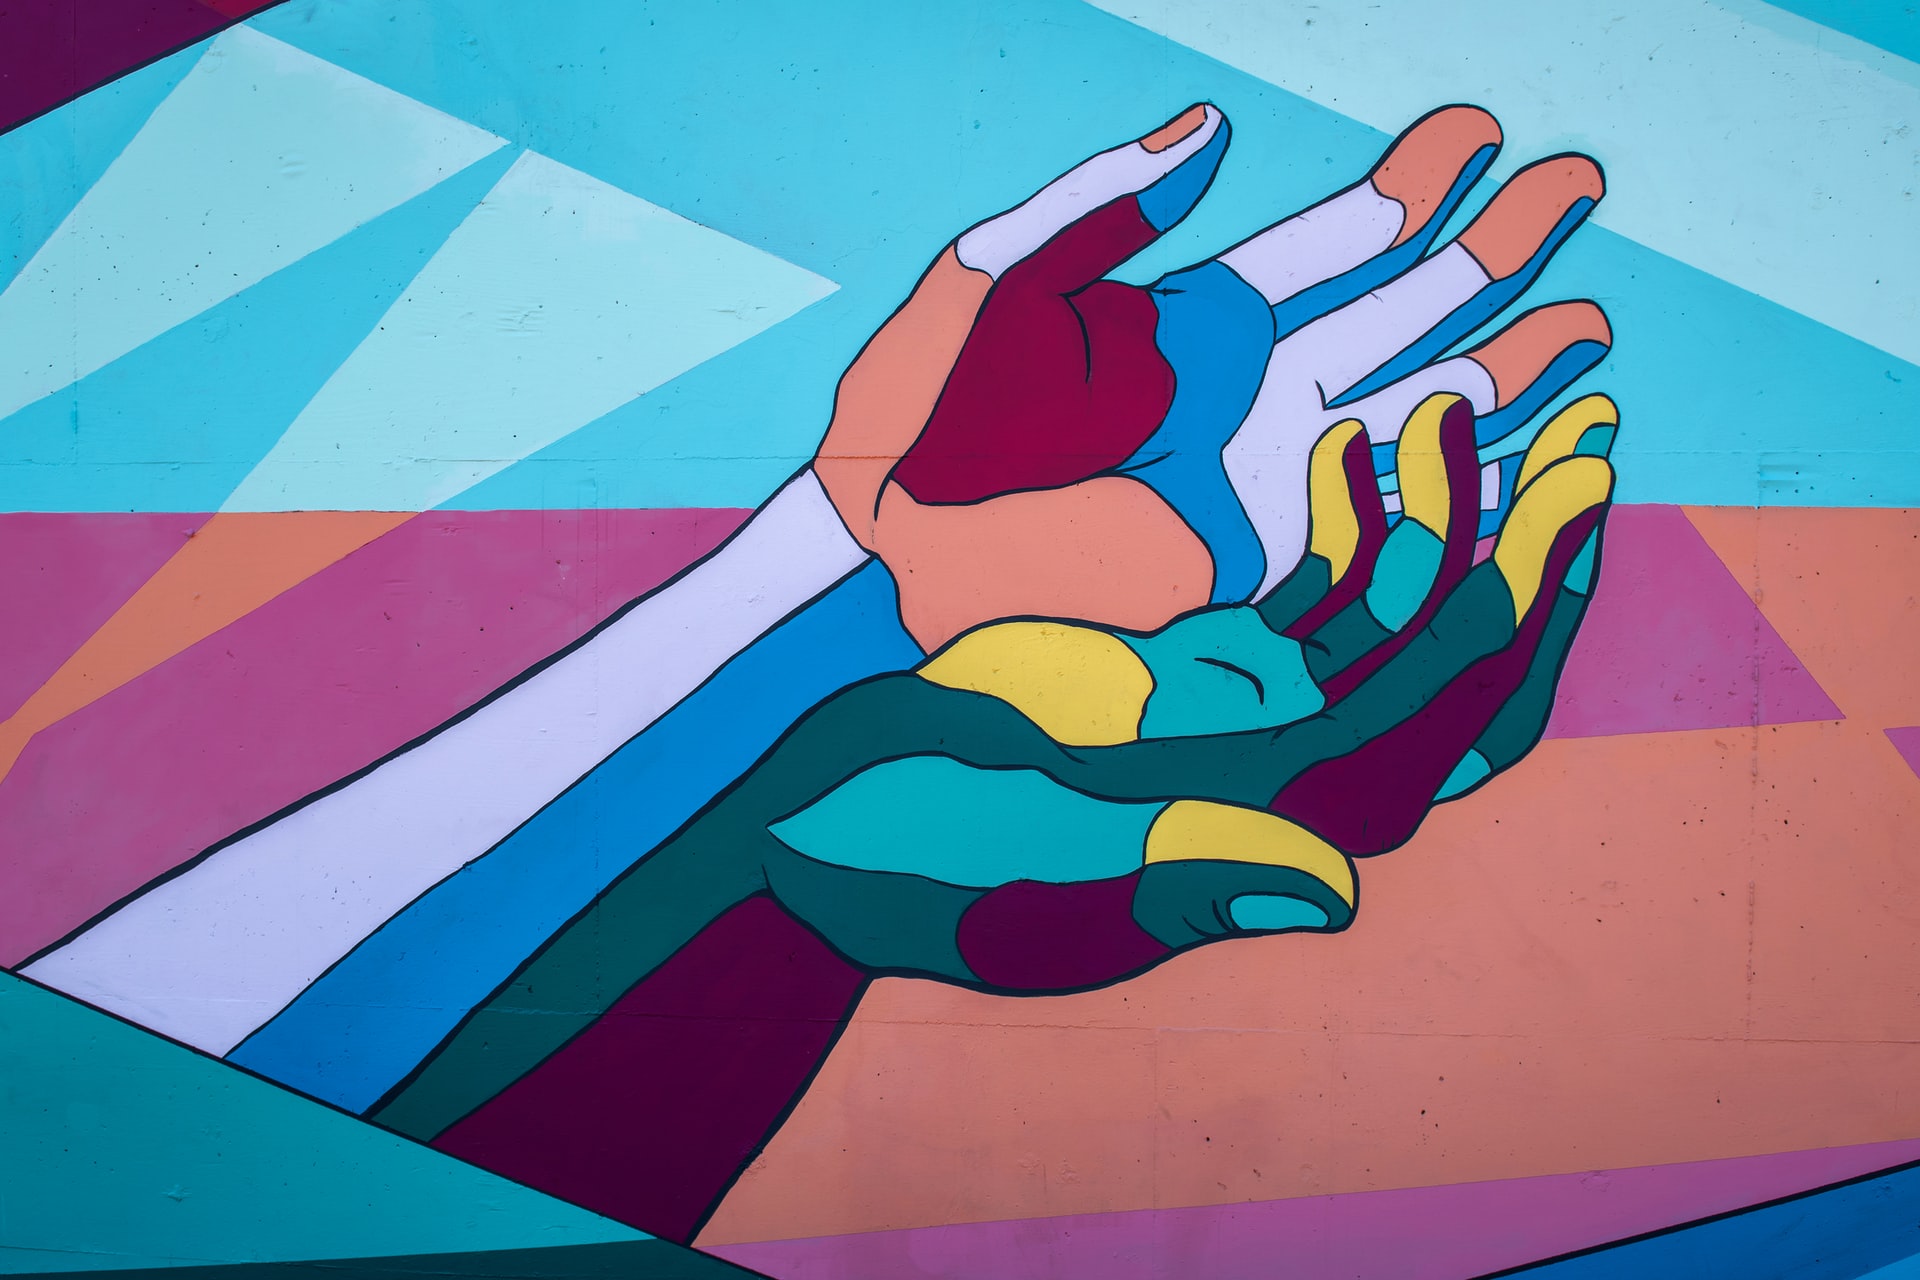 Mural with two hands close together that depict the inclusive culture